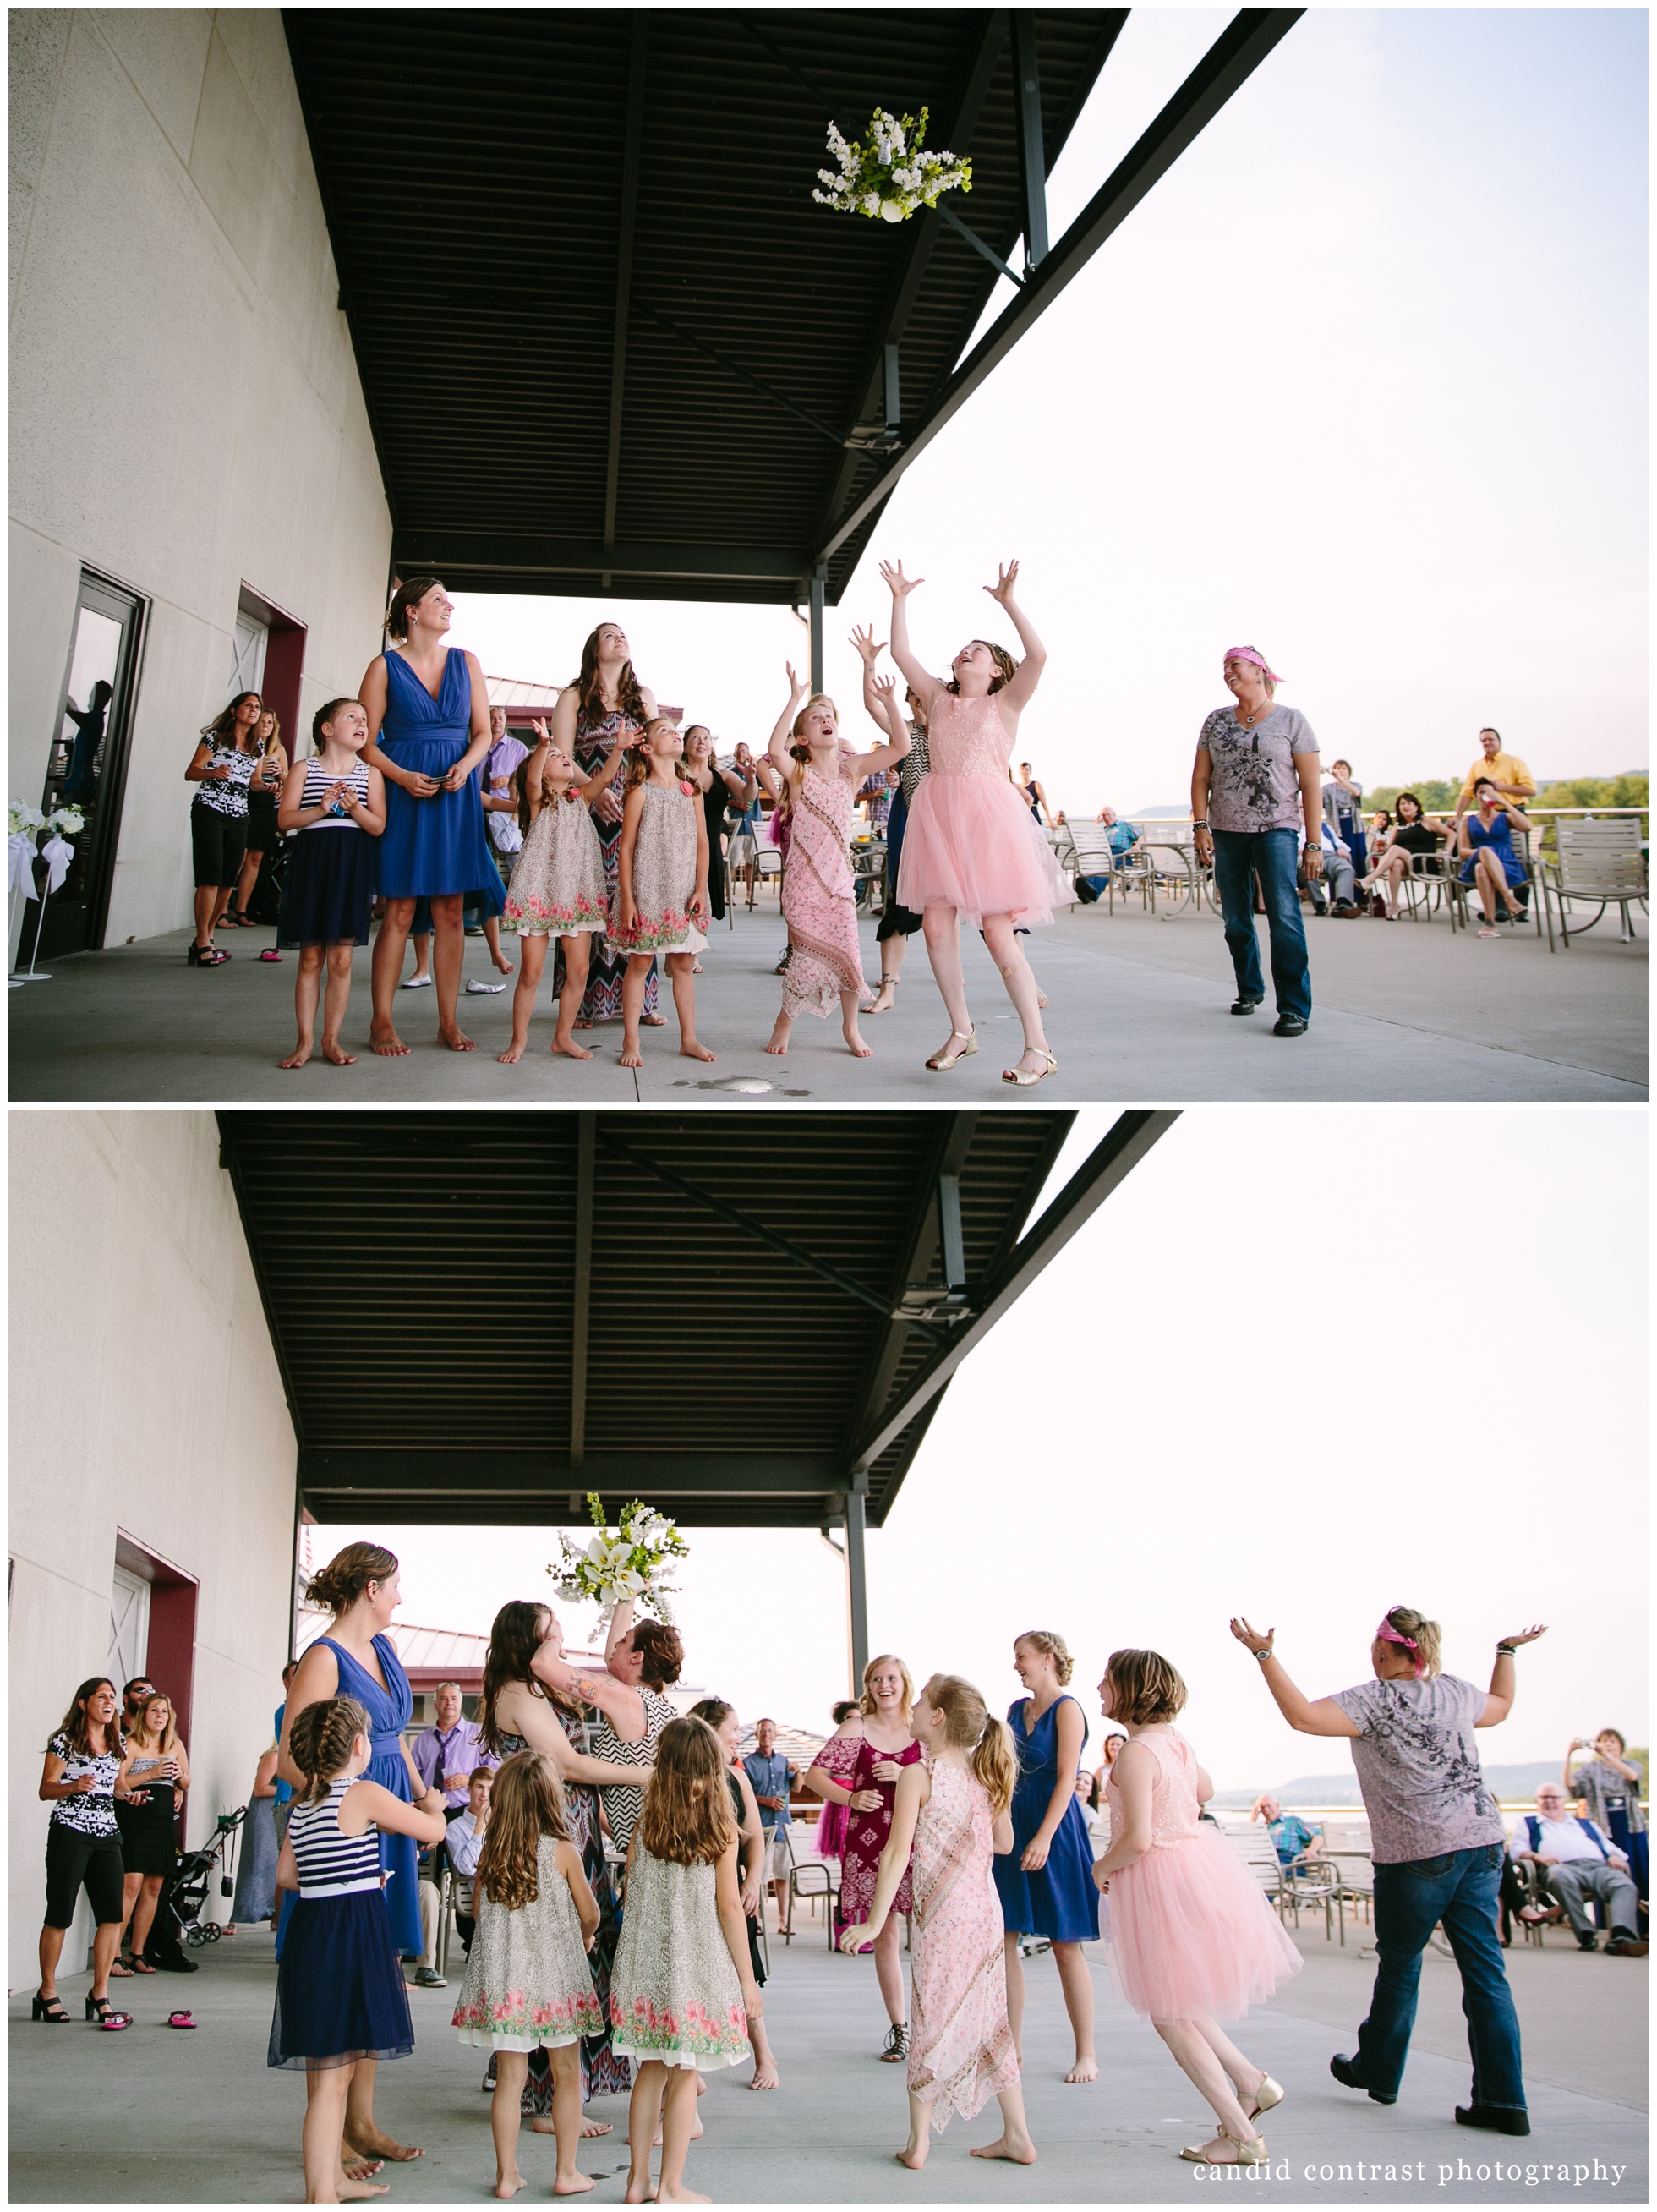 bouquet toss at a bellevue iowa outdoor wedding at the shore event center, iowa wedding photographer candid contrast photography